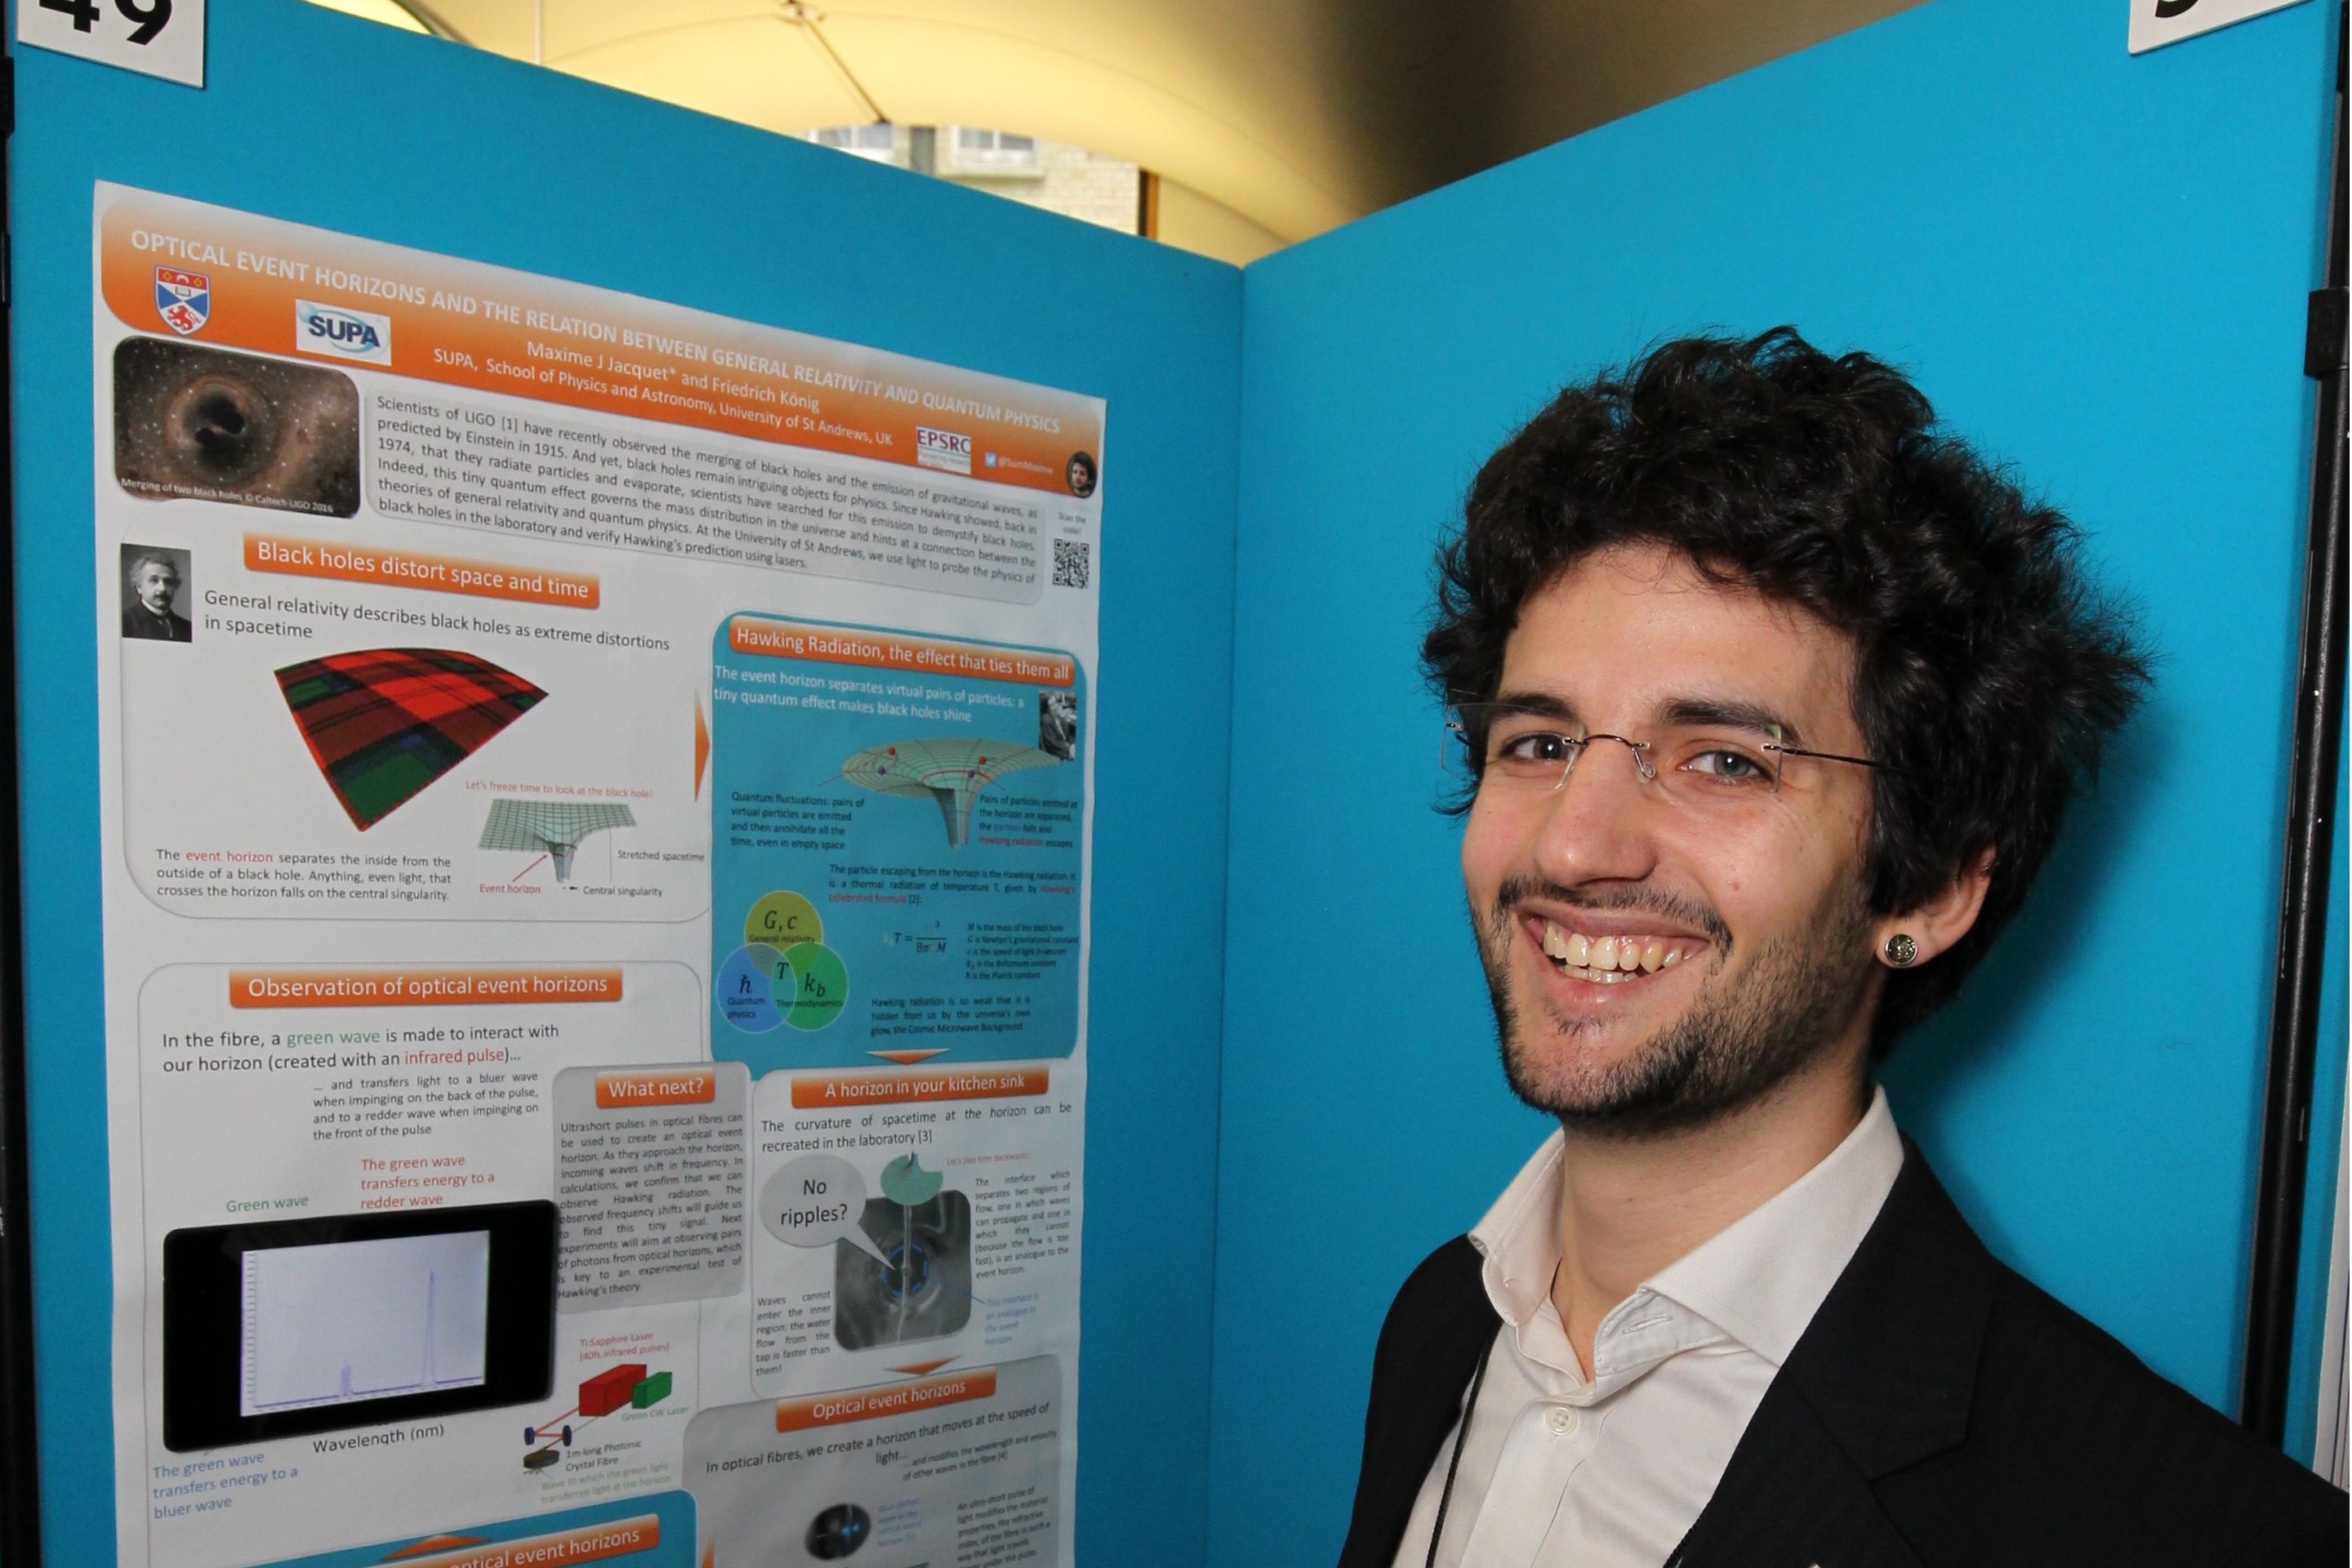 Maxime presents his poster in the House of Commons